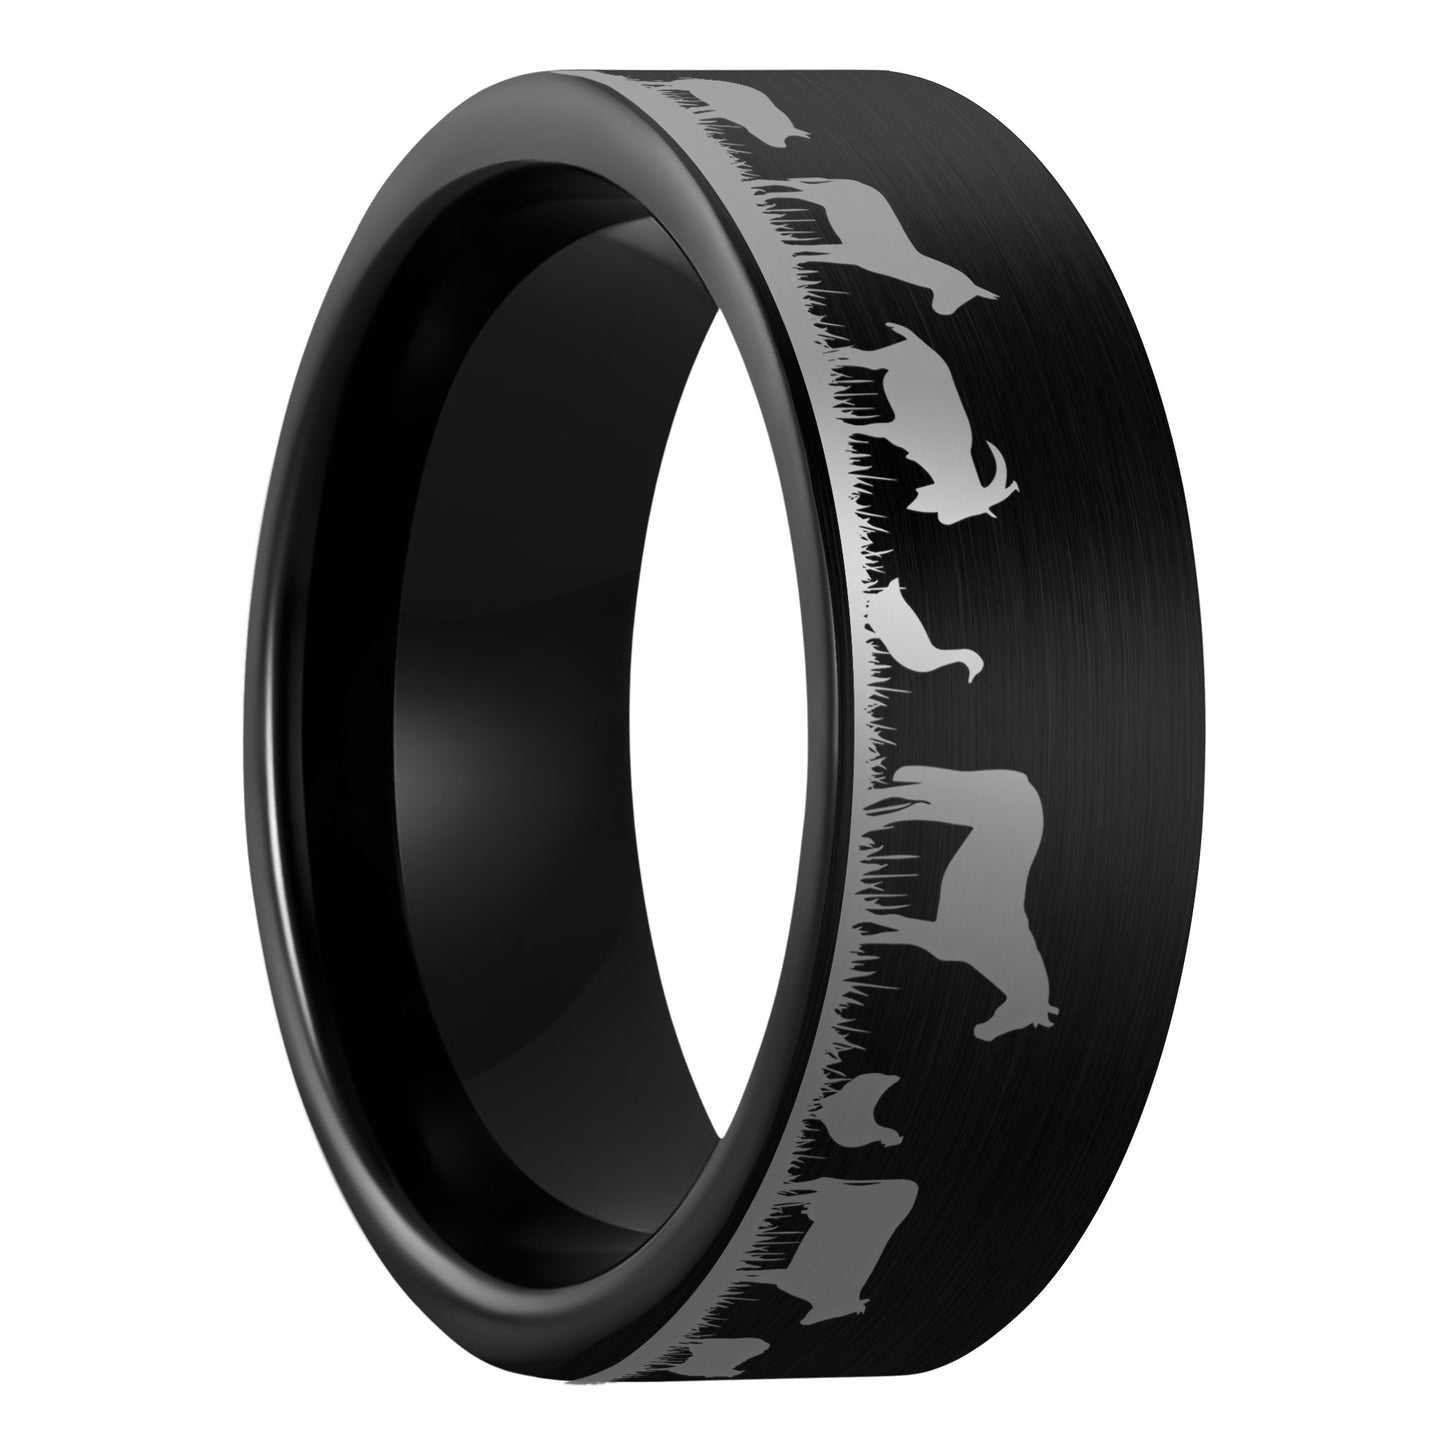 A farm animals brushed black tungsten men's wedding band displayed on a plain white background.